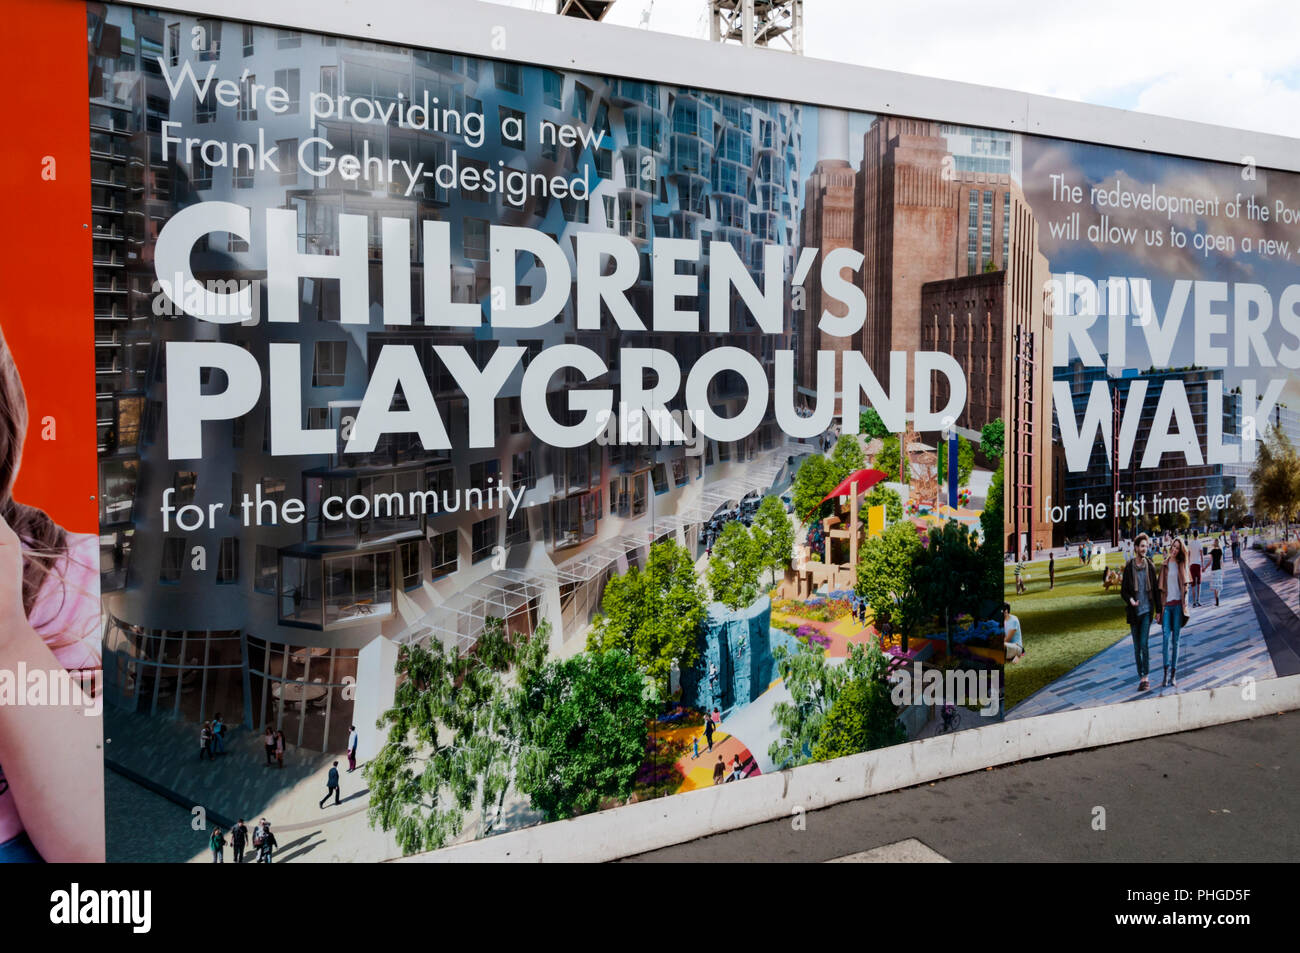 Hoarding around Battersea Power Station redevelopment site promises a children's playground designed by Frank Gehry. Stock Photo